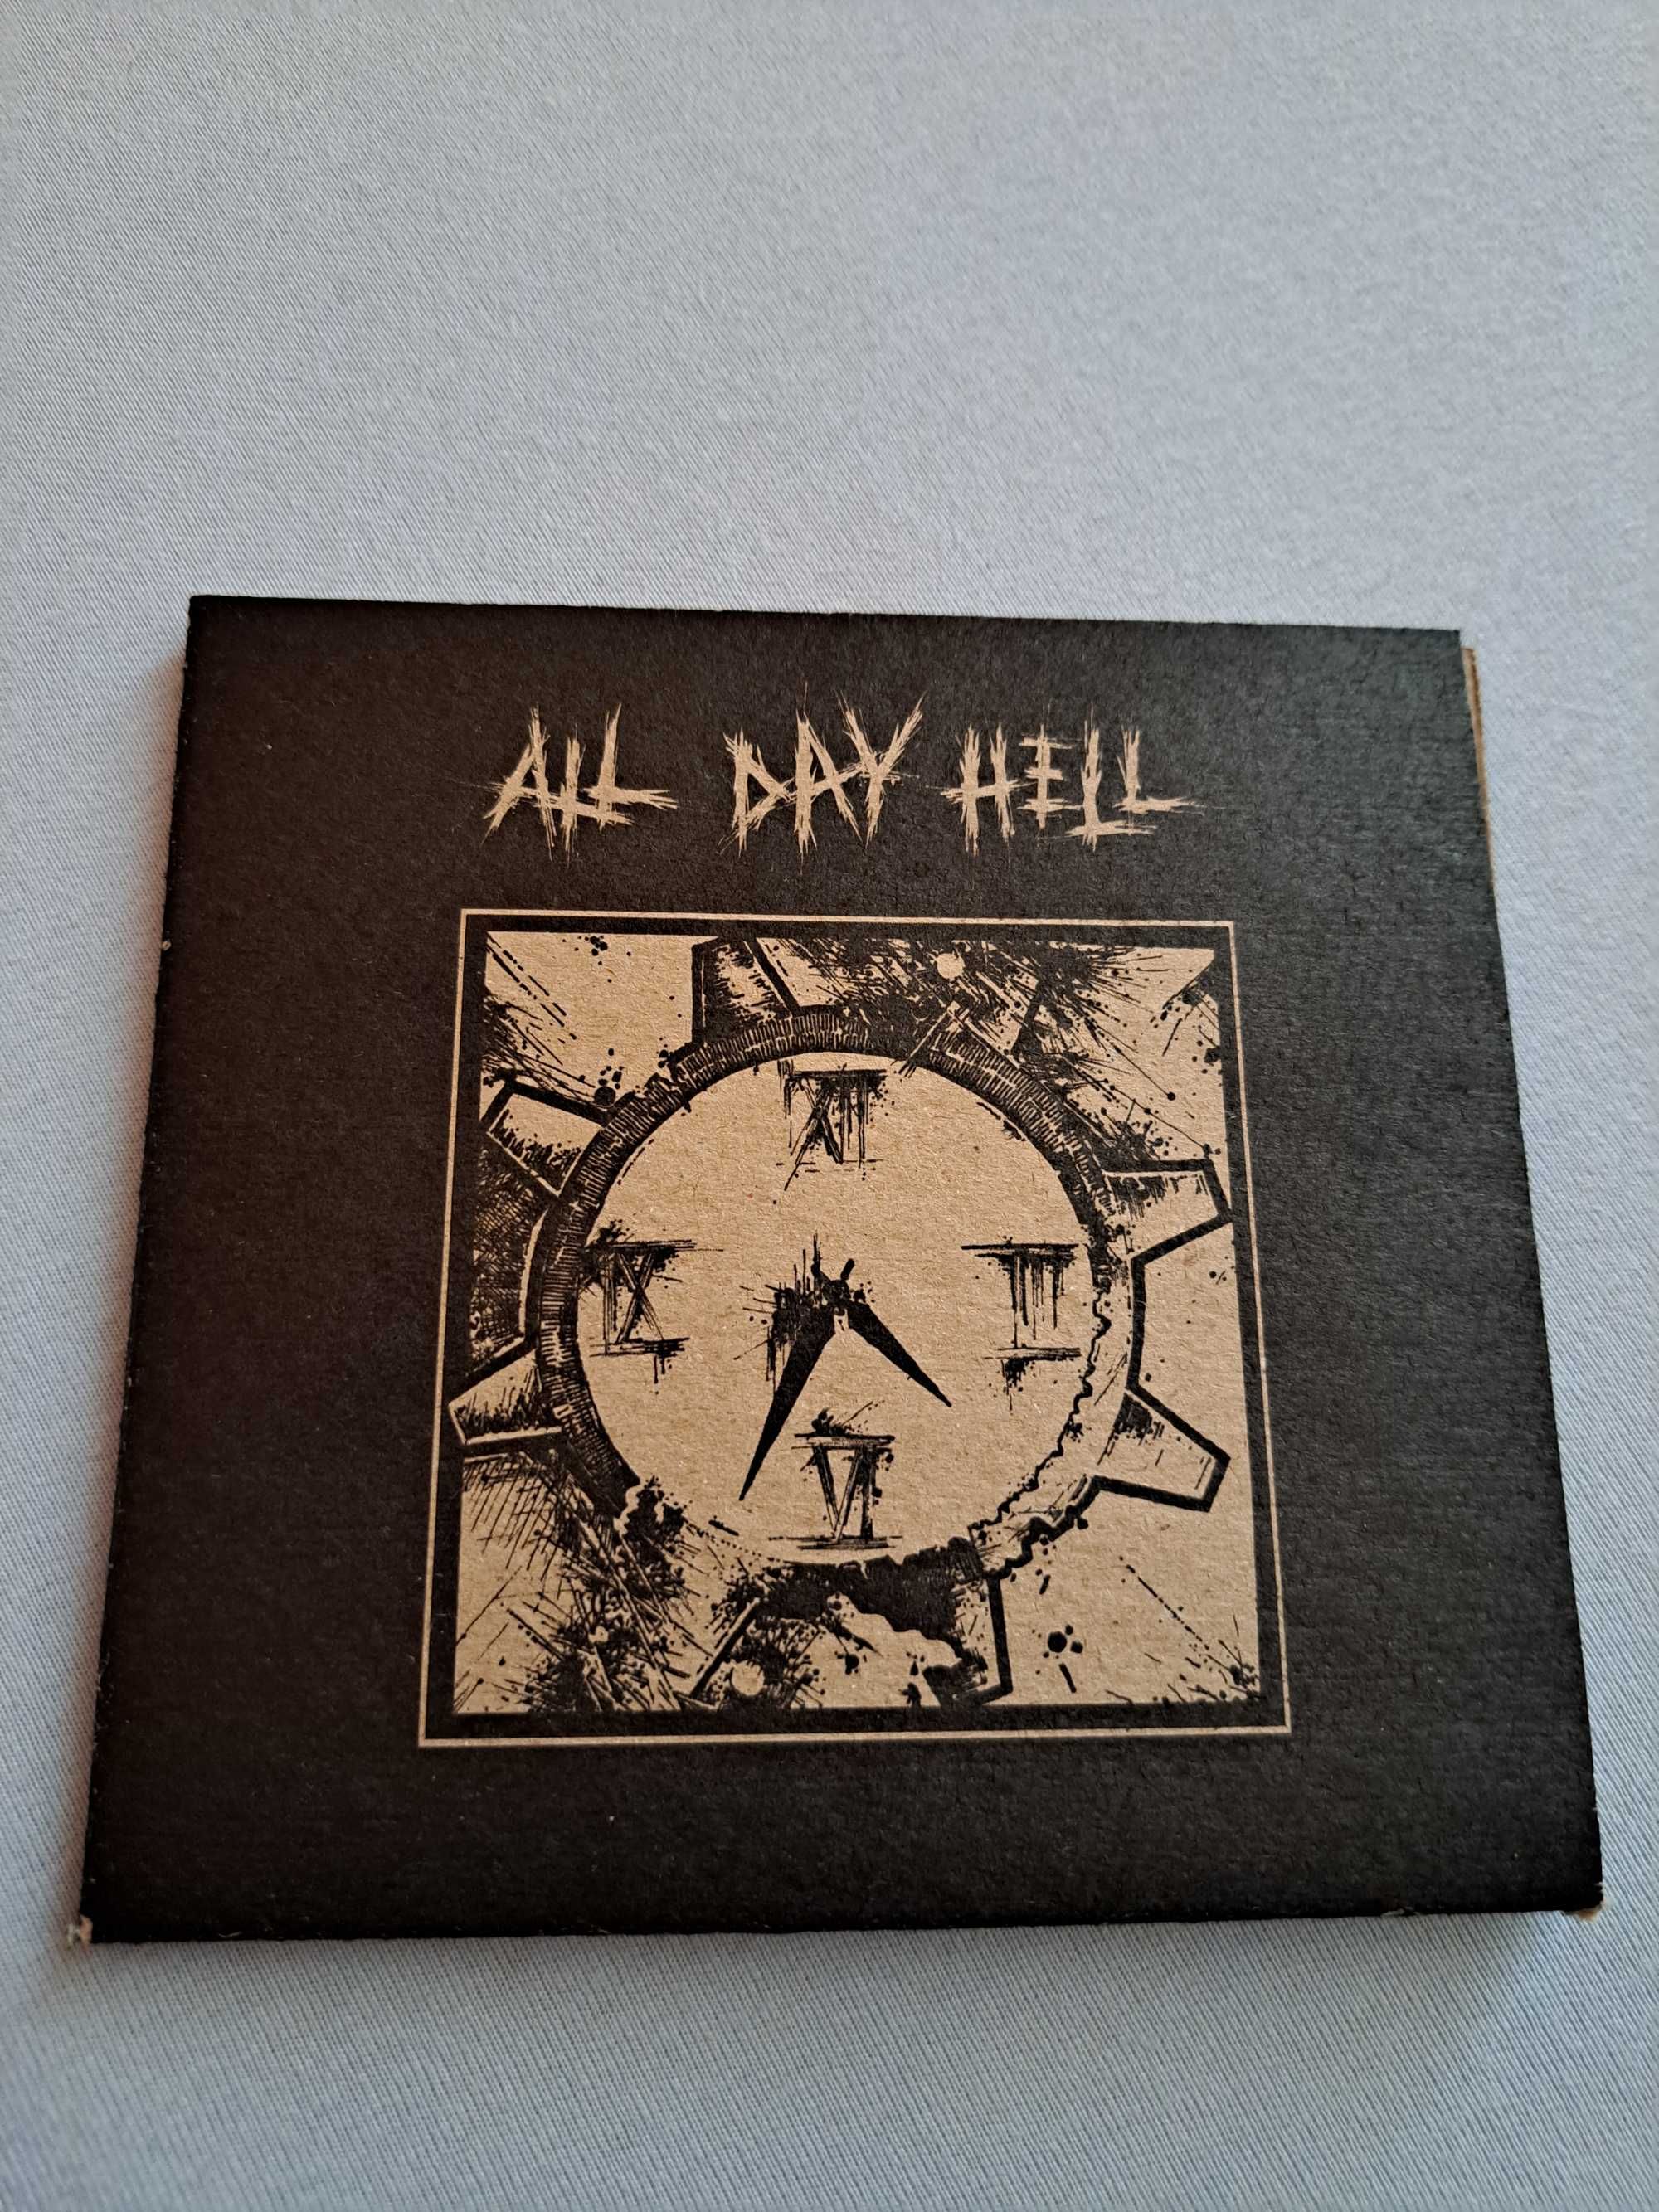 All Day Hell - All Day Hell 2007 CD